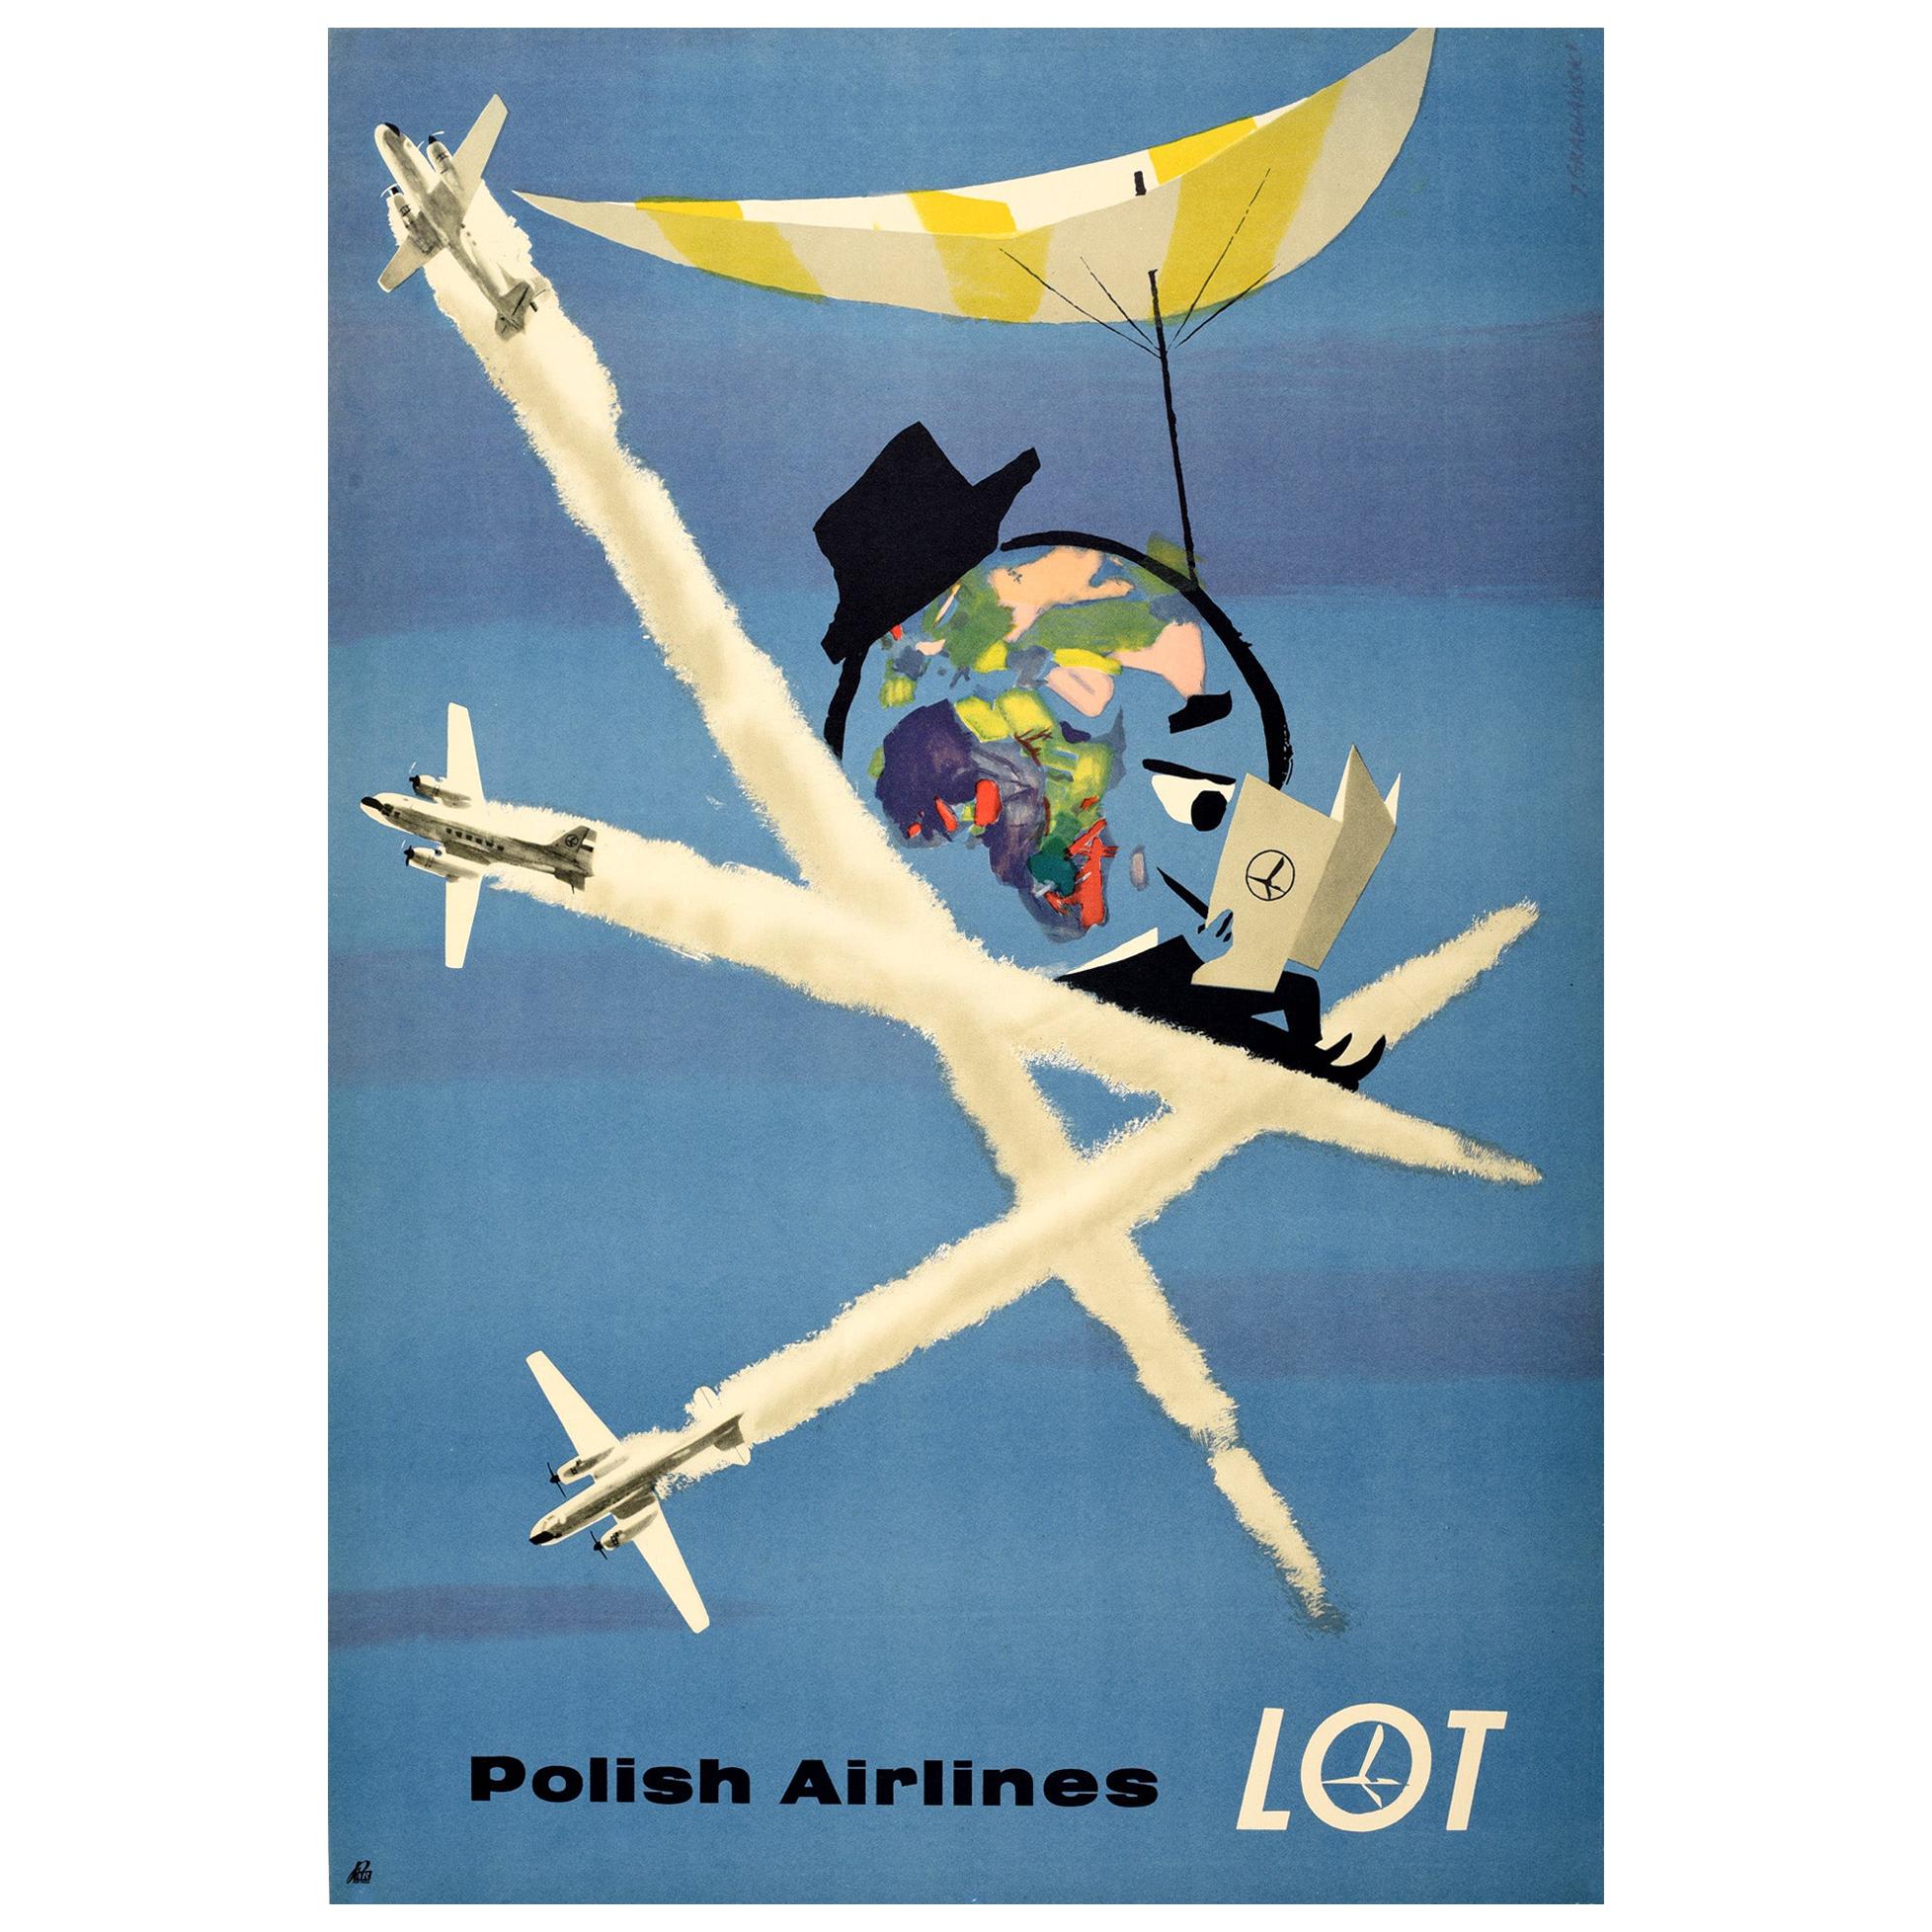 Original Vintage Poster For LOT Polish Airlines World Travel Planes Deck Chair